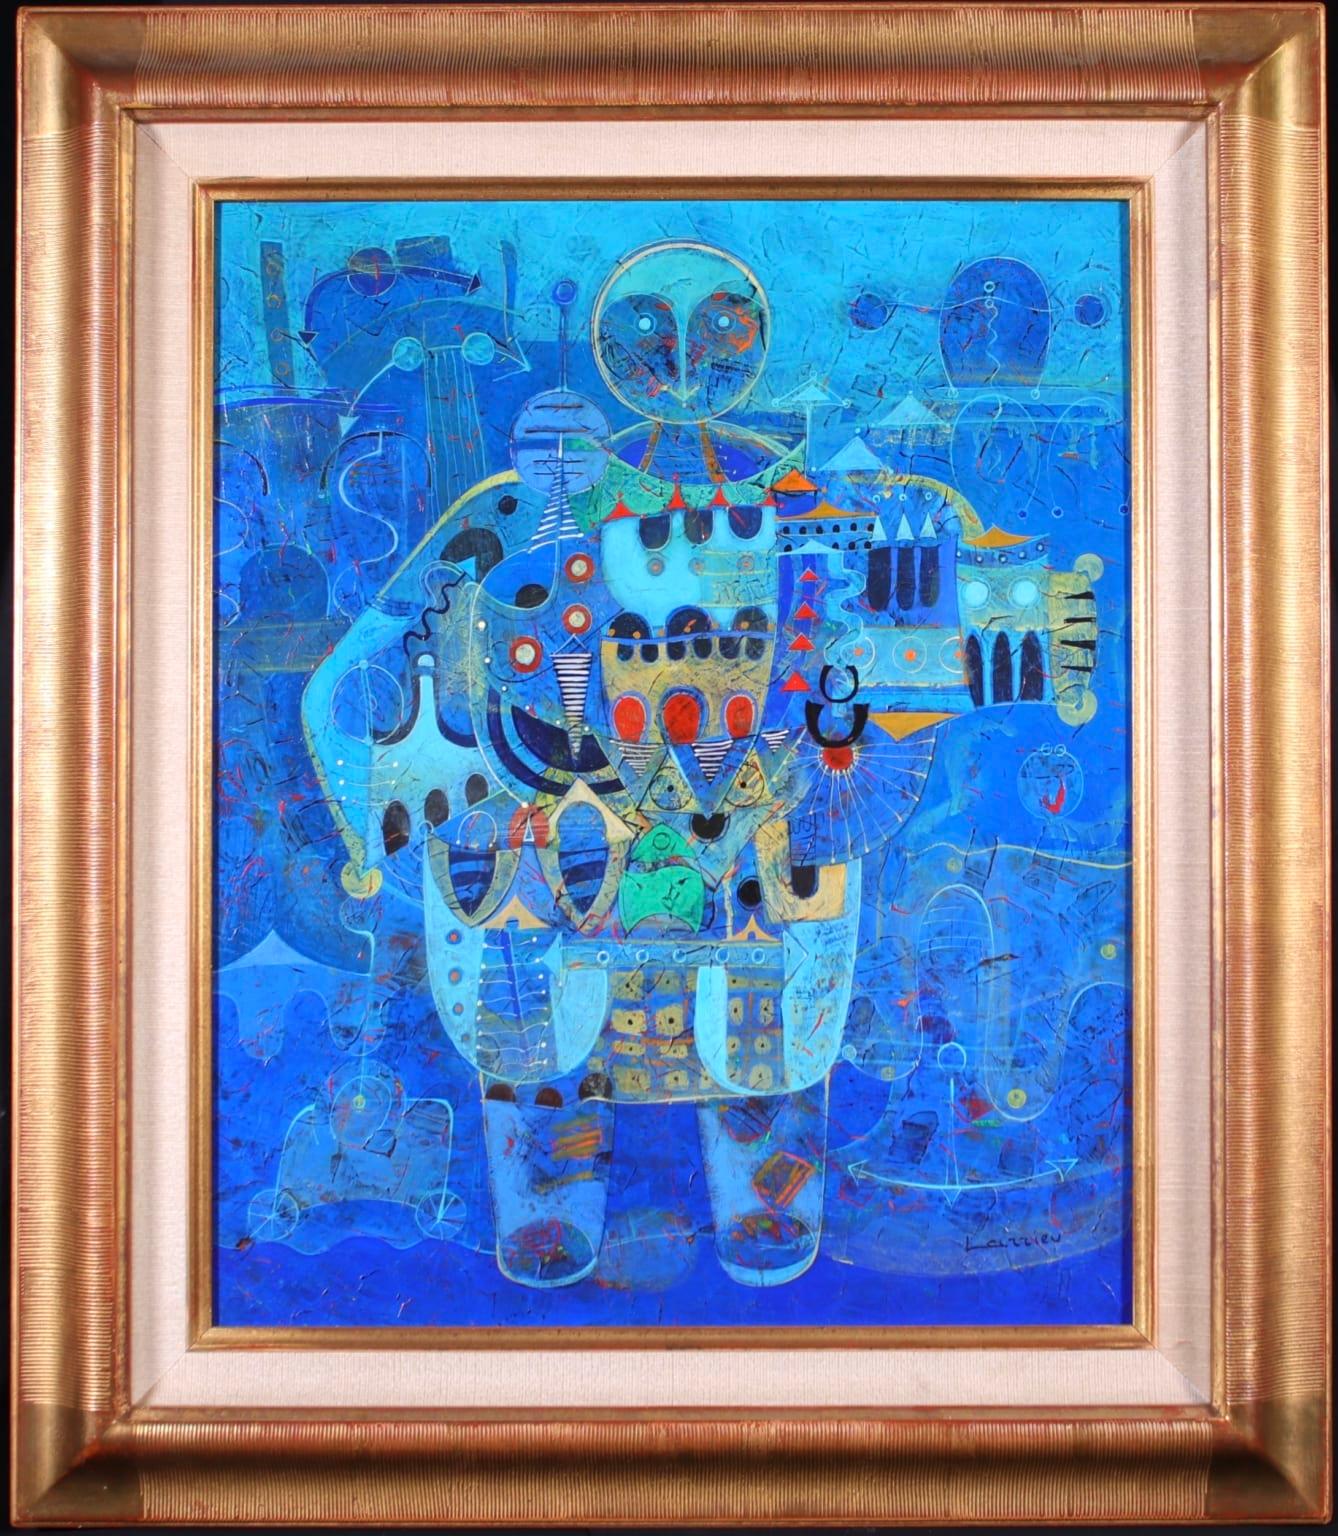 A really wonderful and unique oil on canvas by French Modernist painter Jean-Francois Larrieu. The figure of a man is based on a blue background and constructed from buildings. 

Signature:
Signed lower right

Dimensions:
Framed: 32